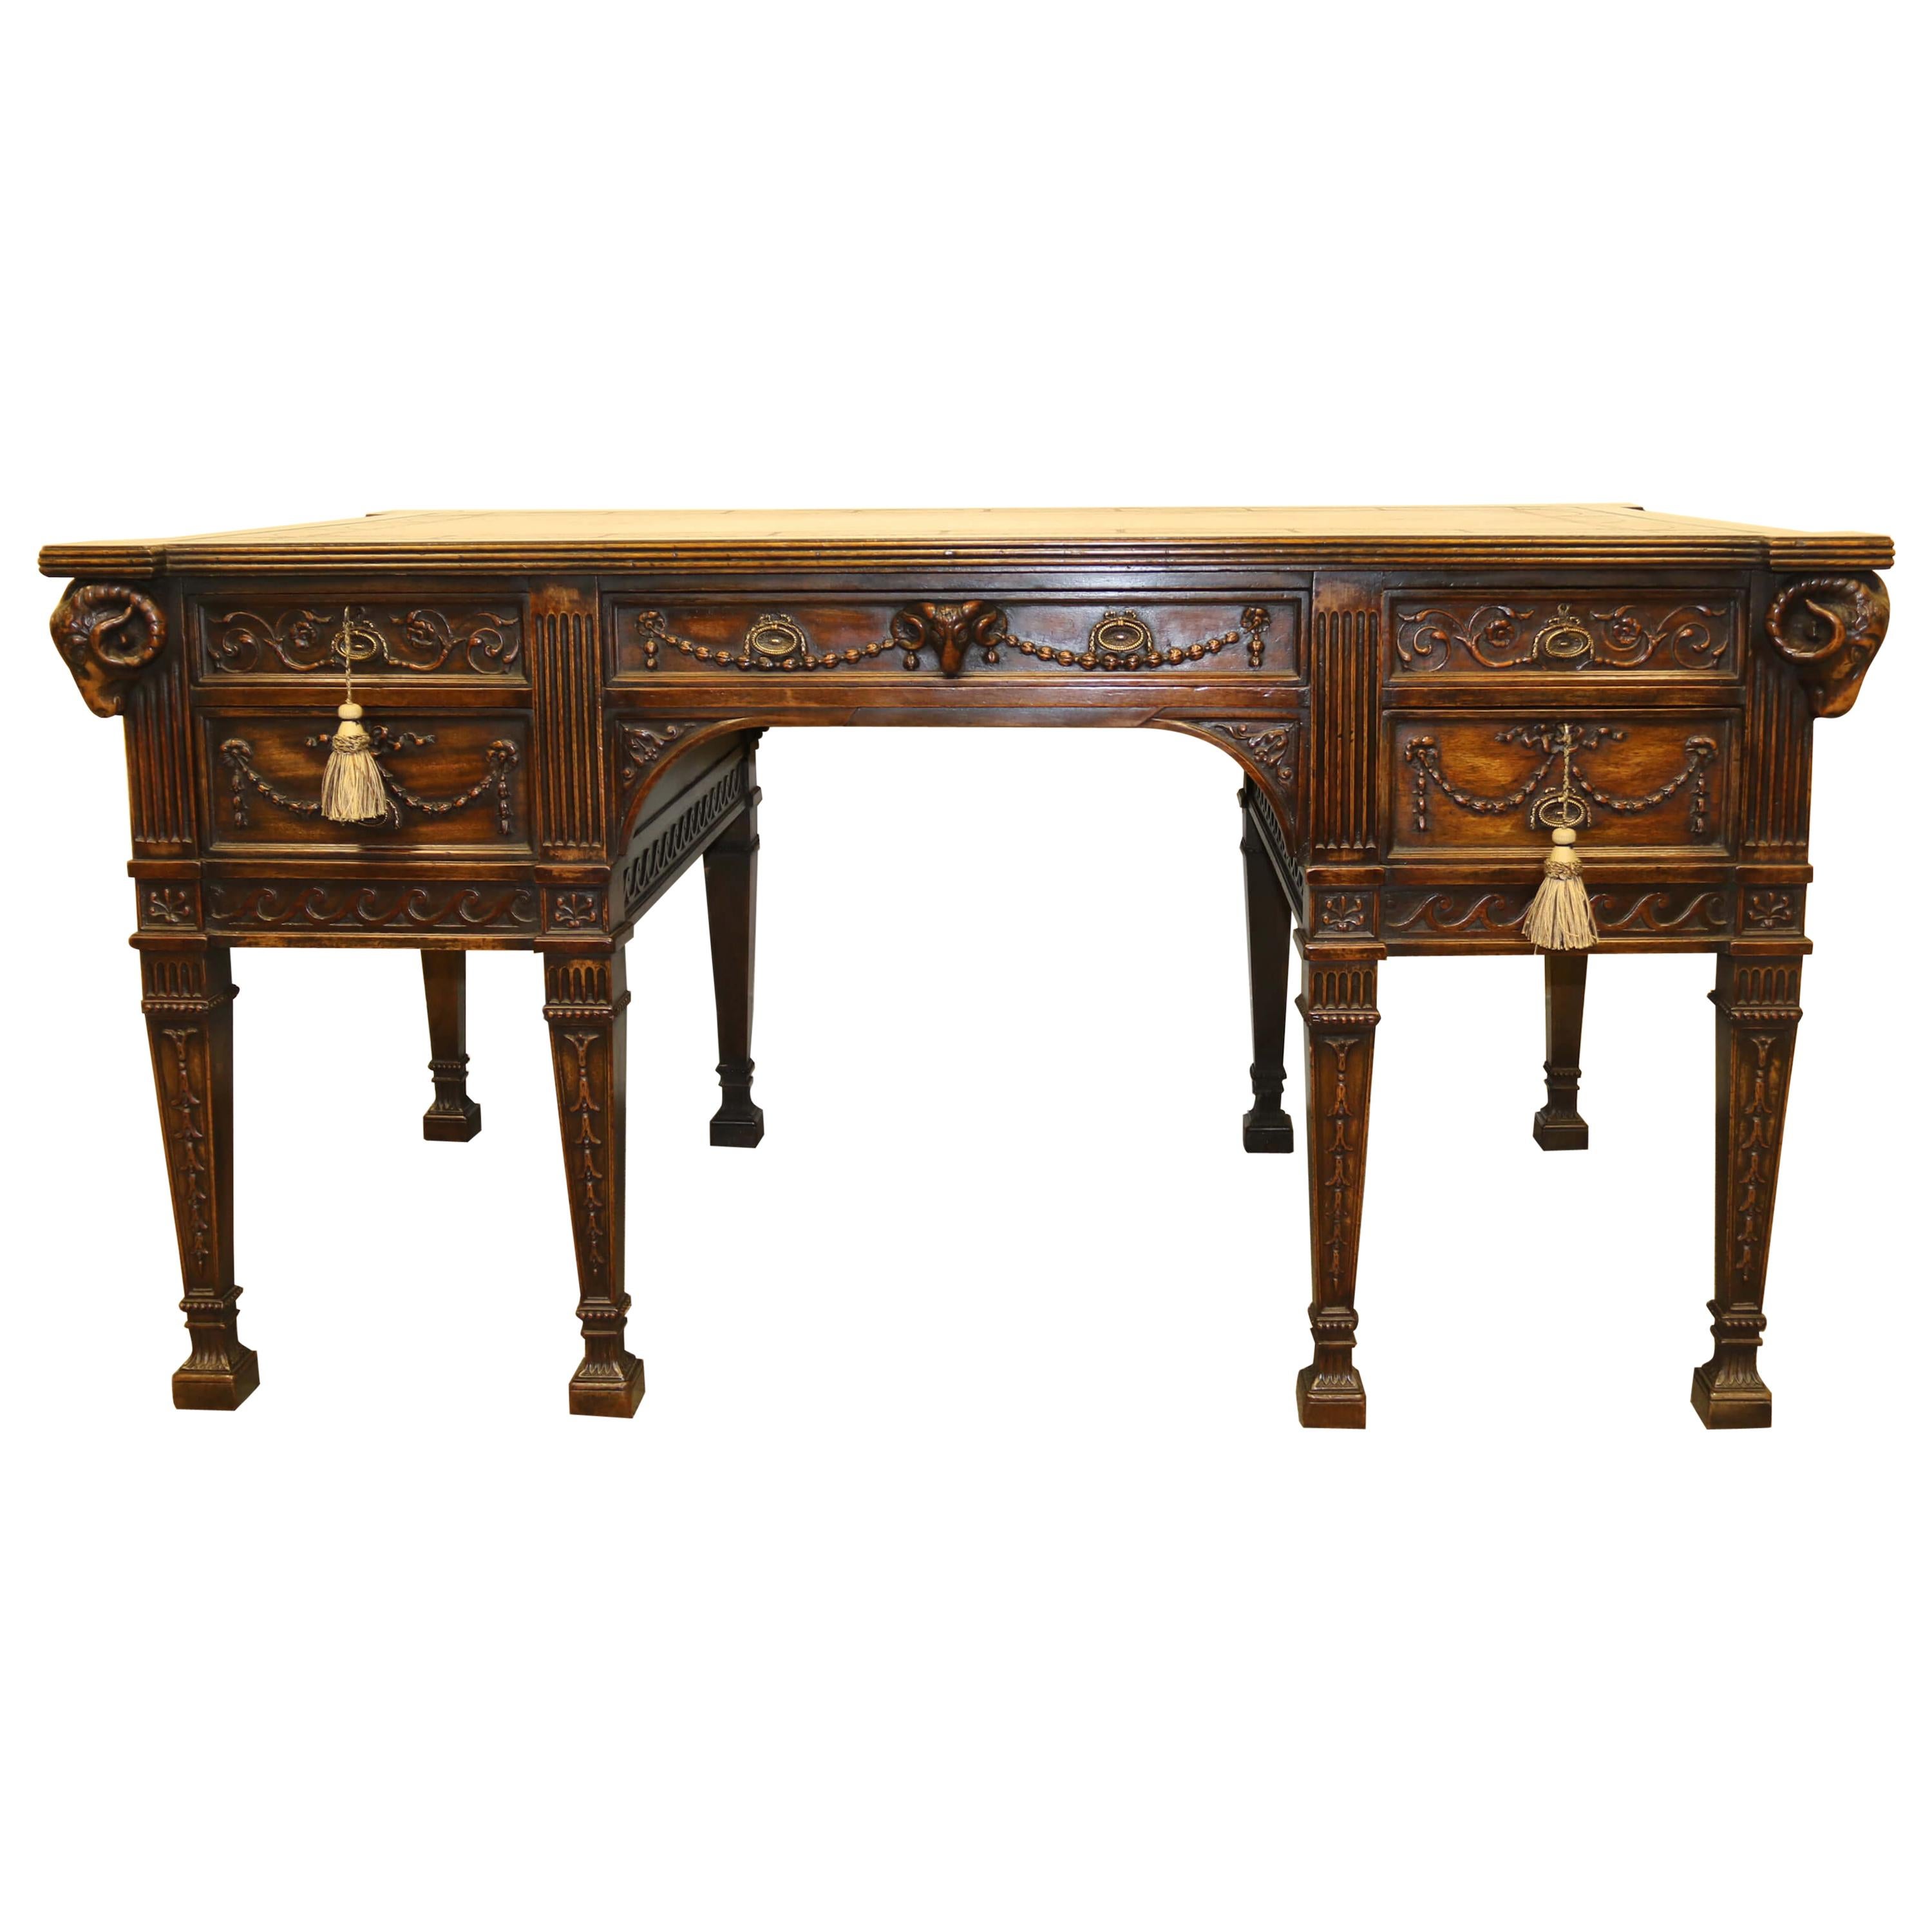 Antique English 19th C Freestanding Mahogany Writing Desk by M.Butler of Dublin For Sale